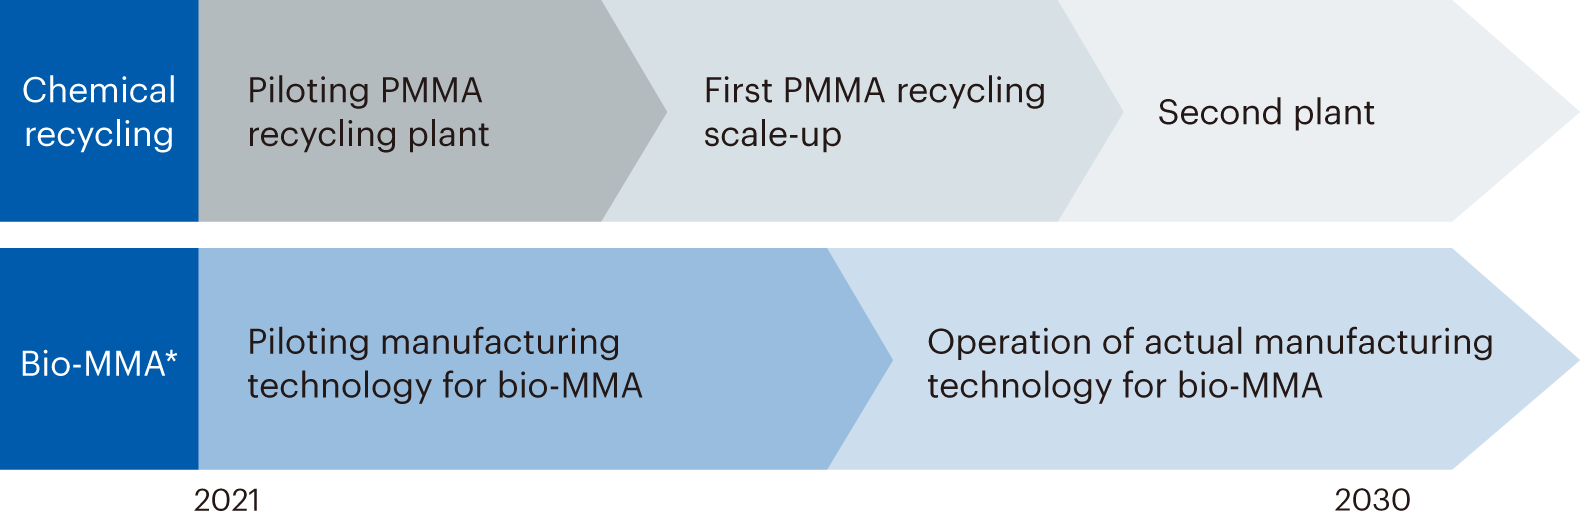 2021 2030 Chemical recycling Piloting PMMA recycling plant First PMMA recycling scale-up Second plant Bio-MMA * Piloting manufacturing technology for bio-MMA Operation of actual manufacturing technology for bio-MMA